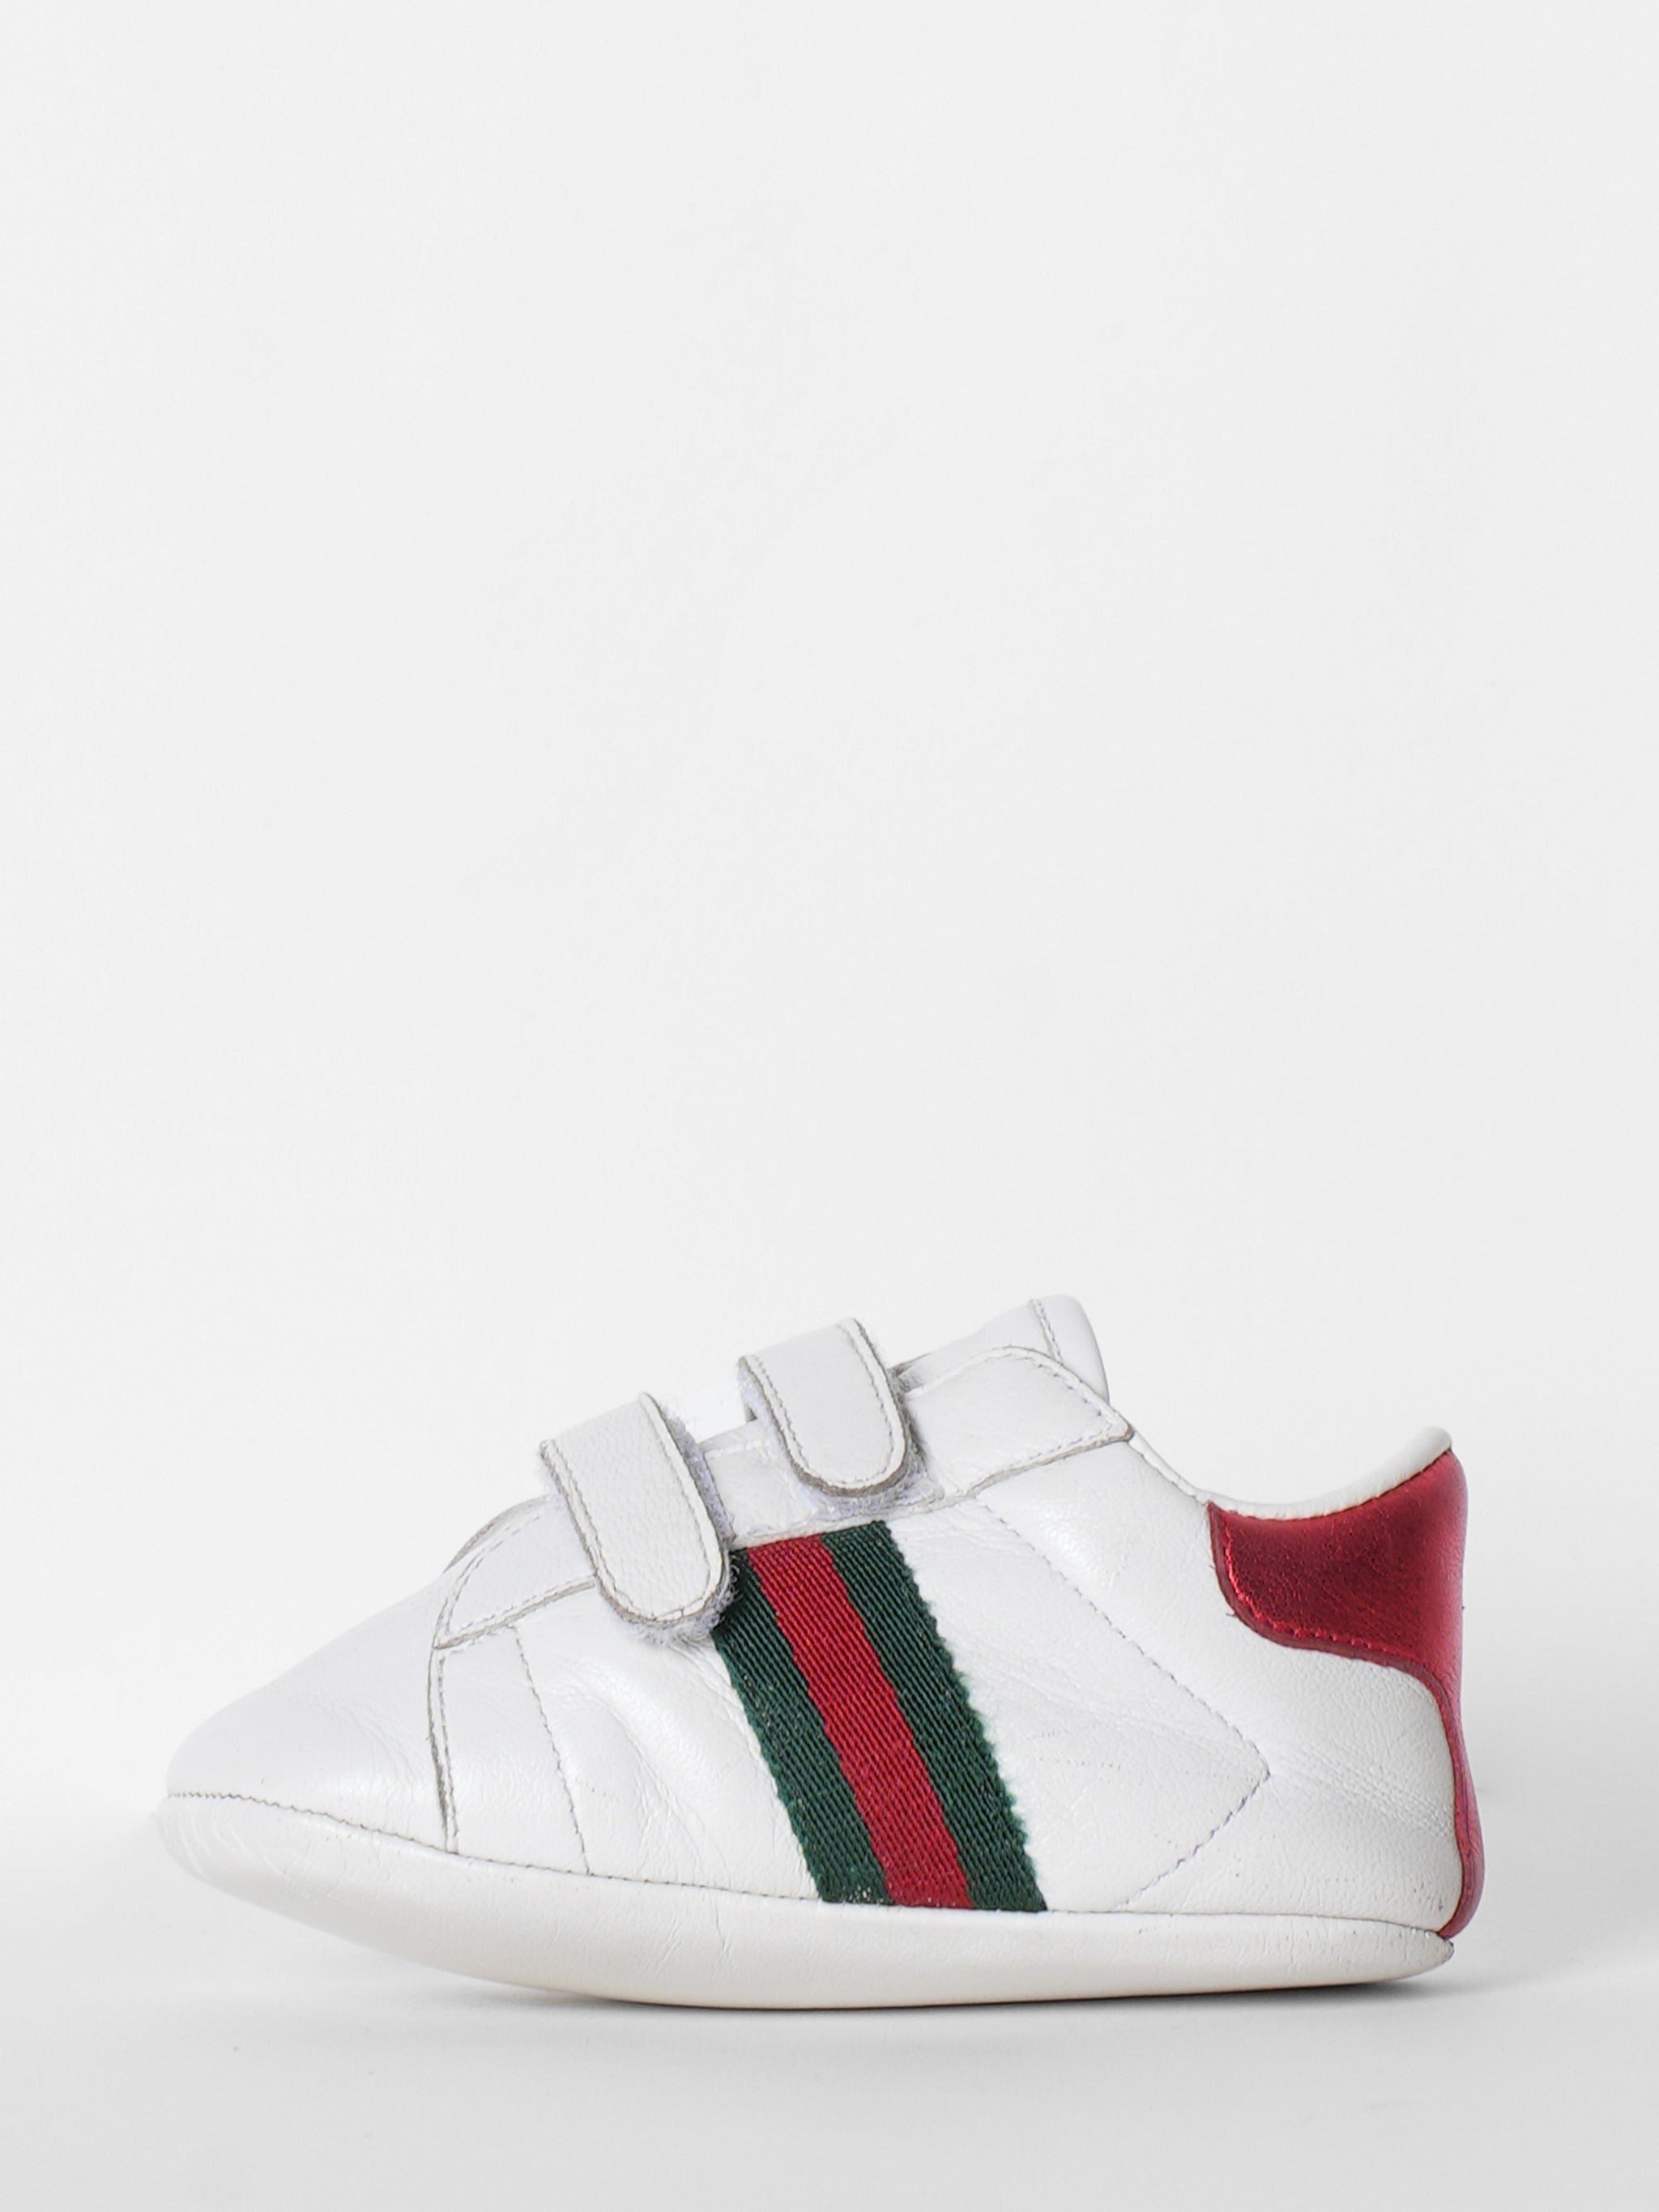 Gucci Leather Web Detail Sneakers